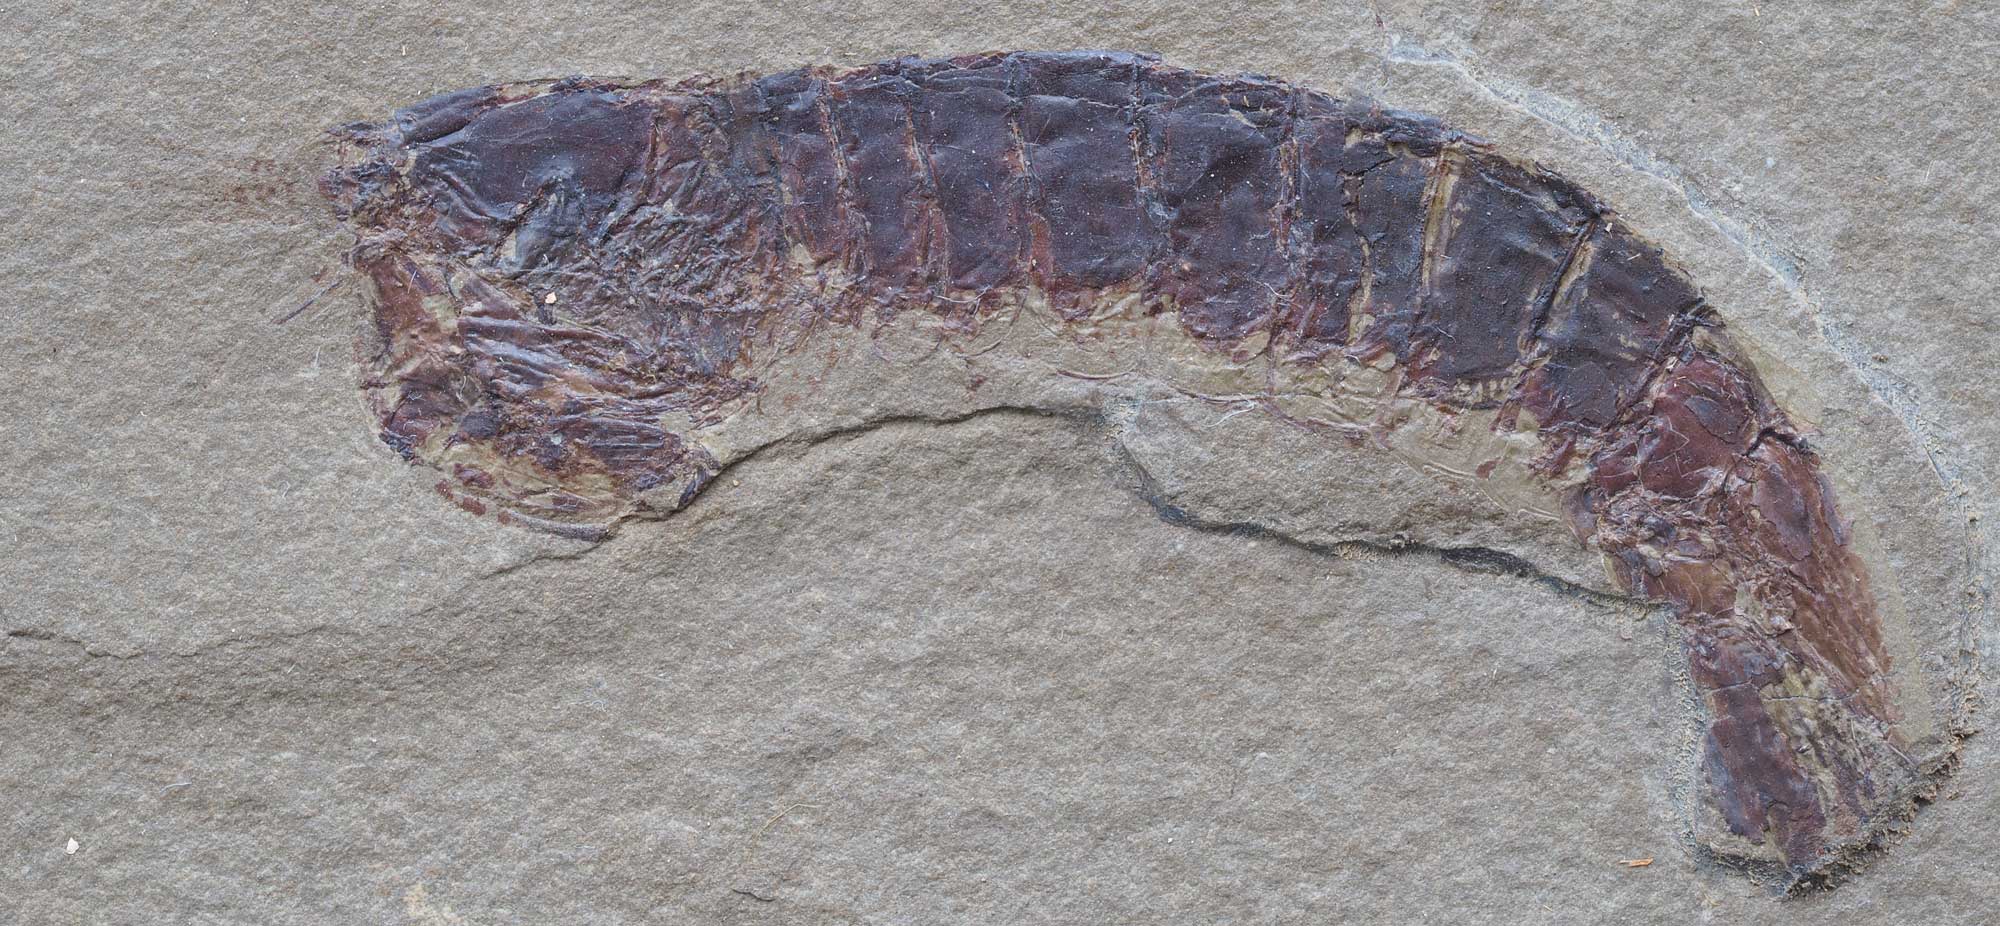 Photograph of a fossil mantis shrimp from the Mississippian Bear Gulch fauna of Montana. The photo shows a gray-brown rock with a compression of a mantis shrimp preserved in side view. The head of the shrimp is pointed to the left, and its front legs are folded beneath its body.